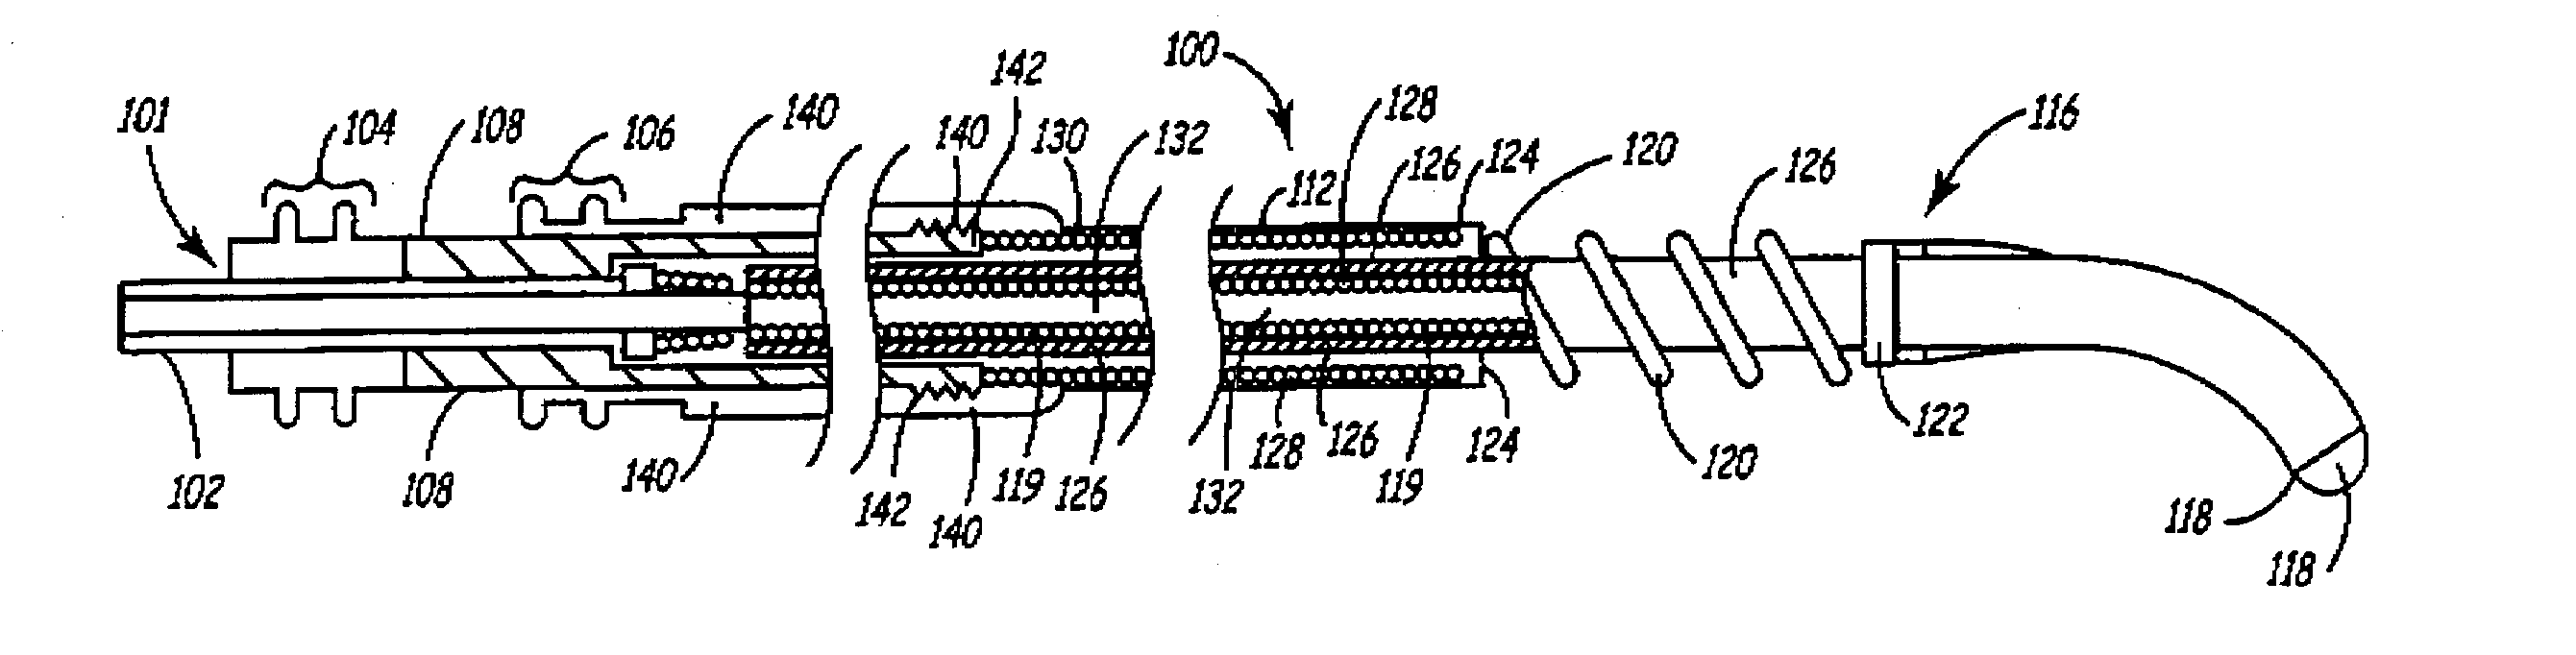 Deployable medical lead fixation system and method